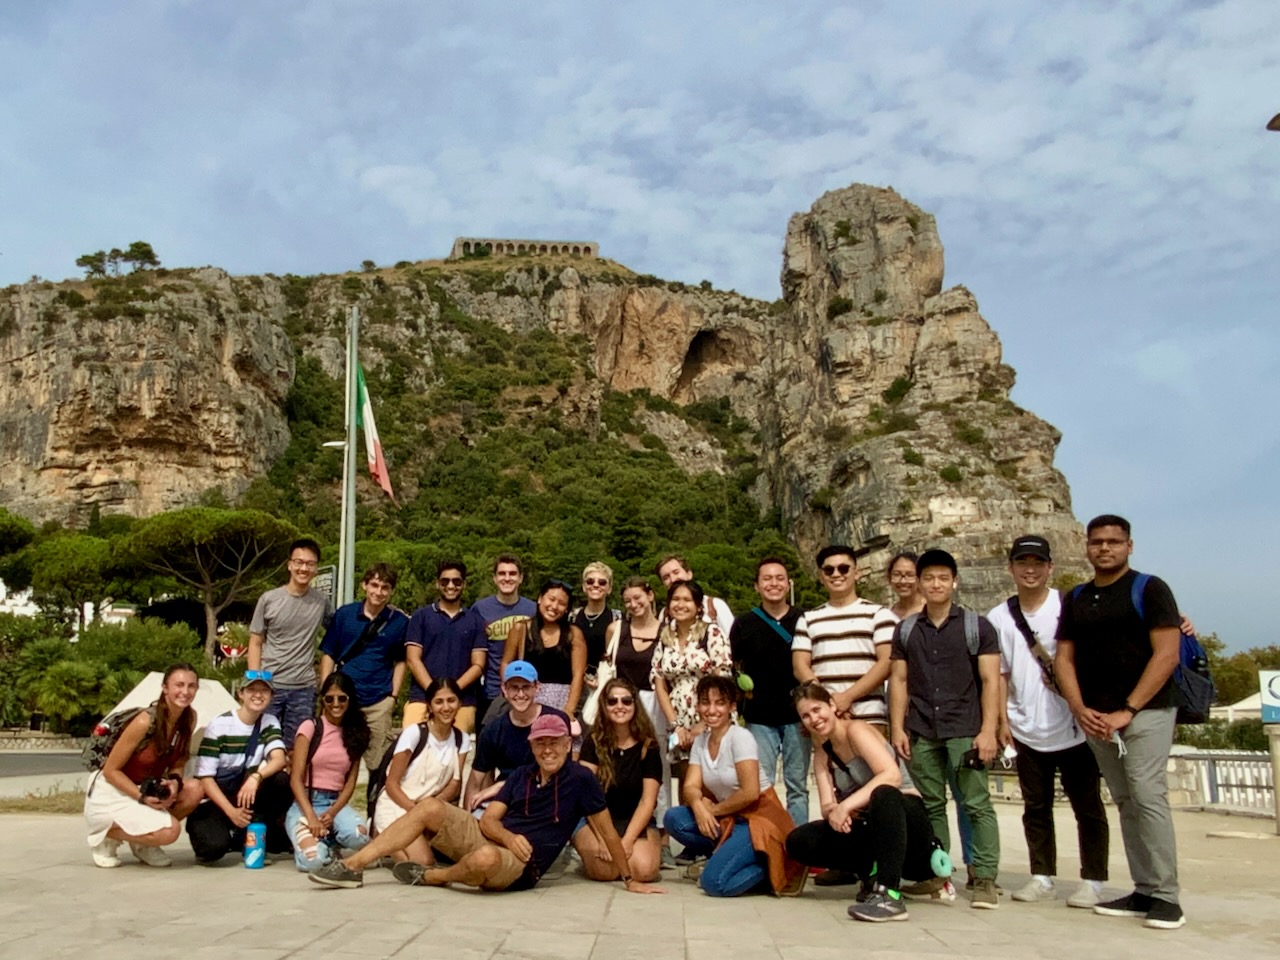 Architecture students on a global program in Rome lead by Professor Tom Rankin in fall 2022 pose for a photo